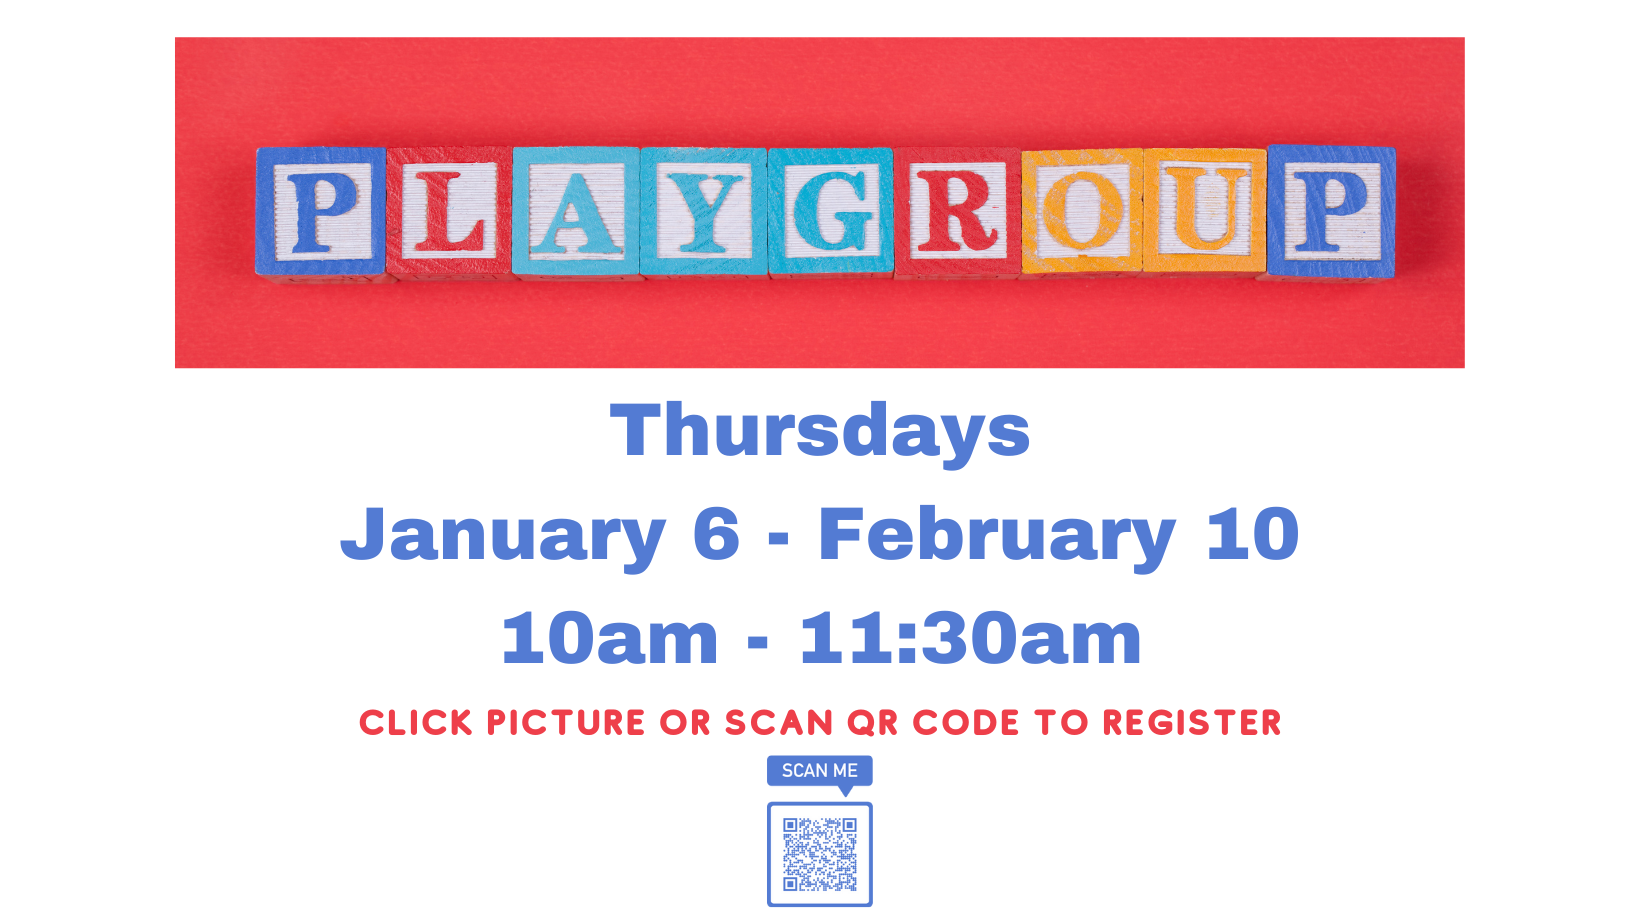 CAROUSEL PLAY GROUP 1.6.22-2.10.22.png